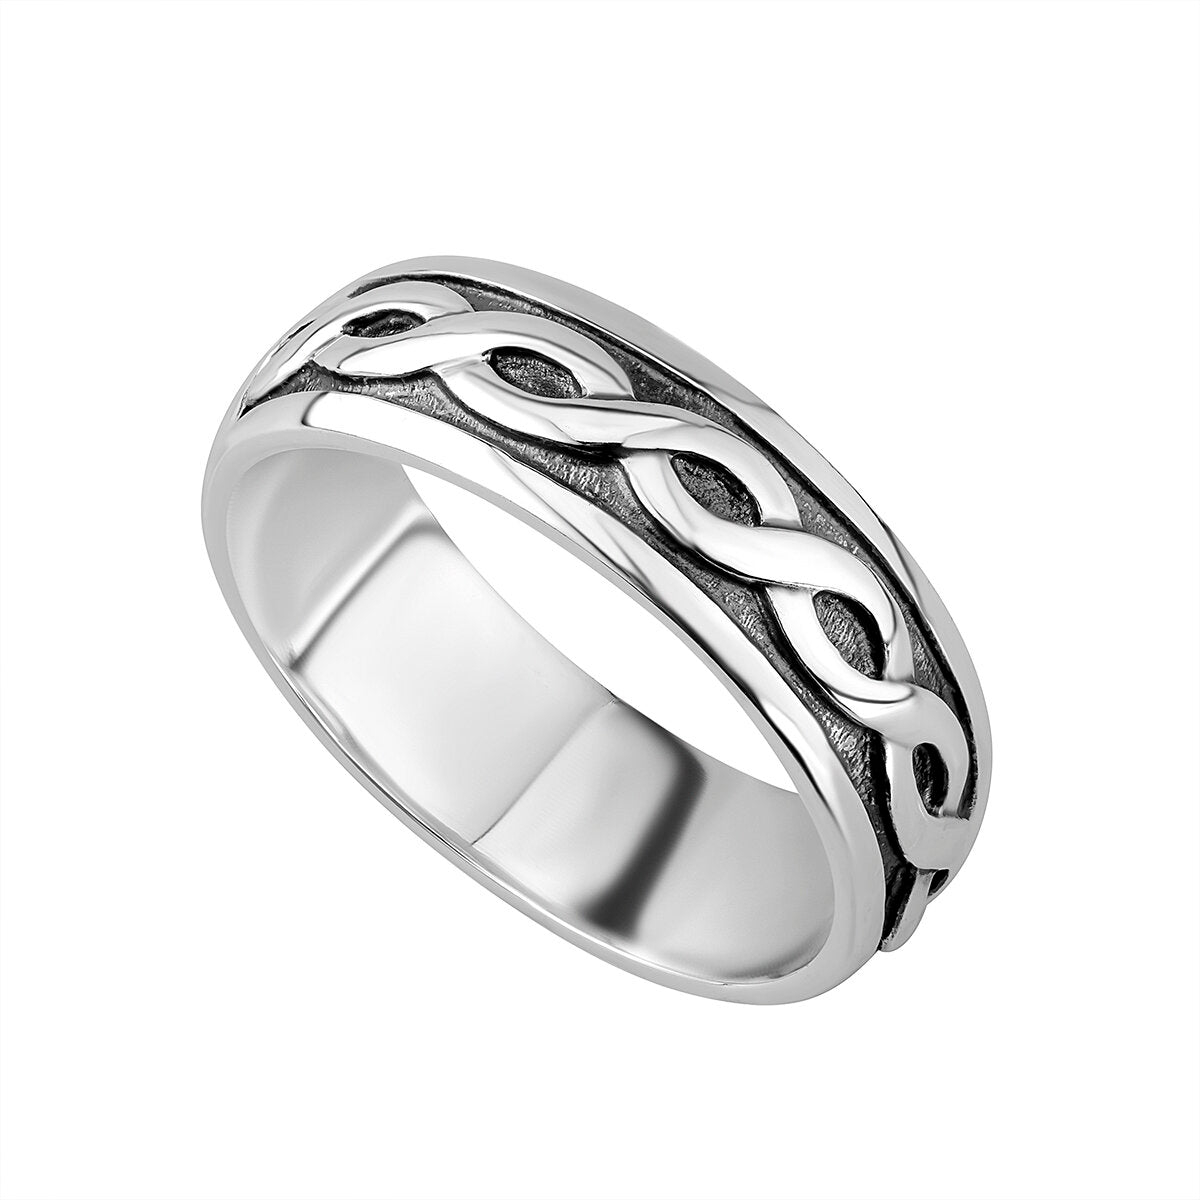 GENTS SILVER CELTIC RING S2649